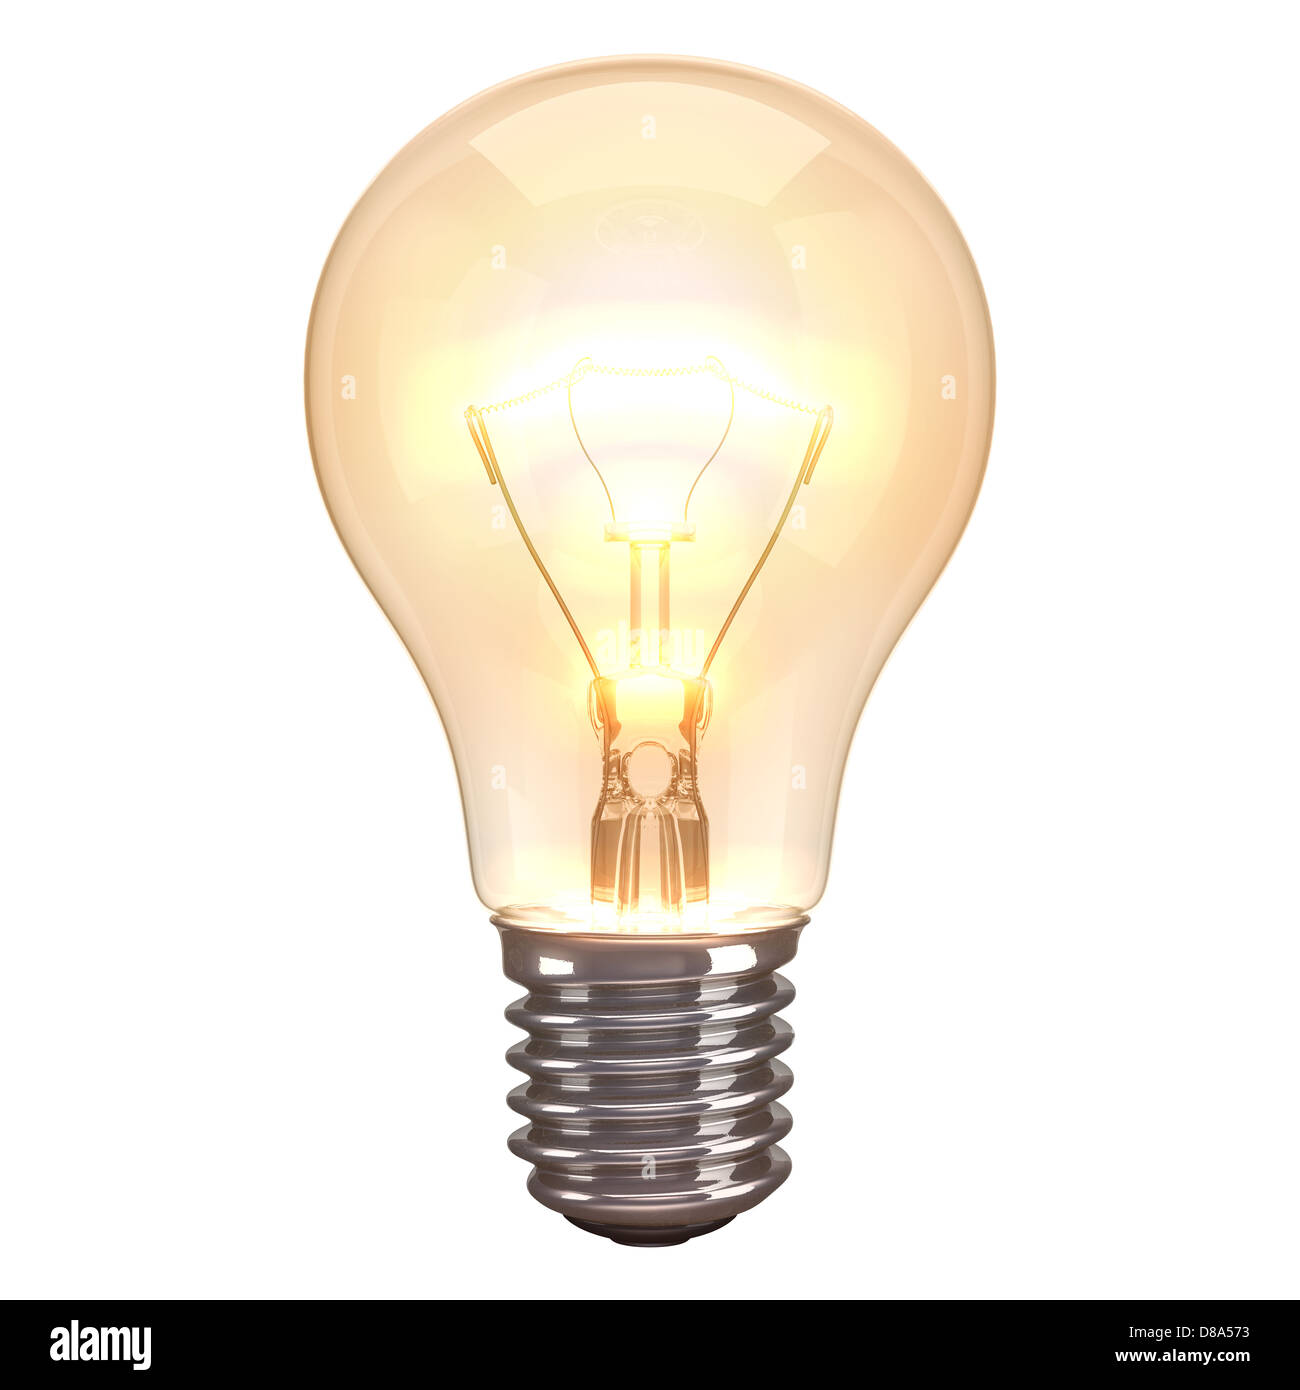 Incandescent lamp burning on a white background. Stock Photo